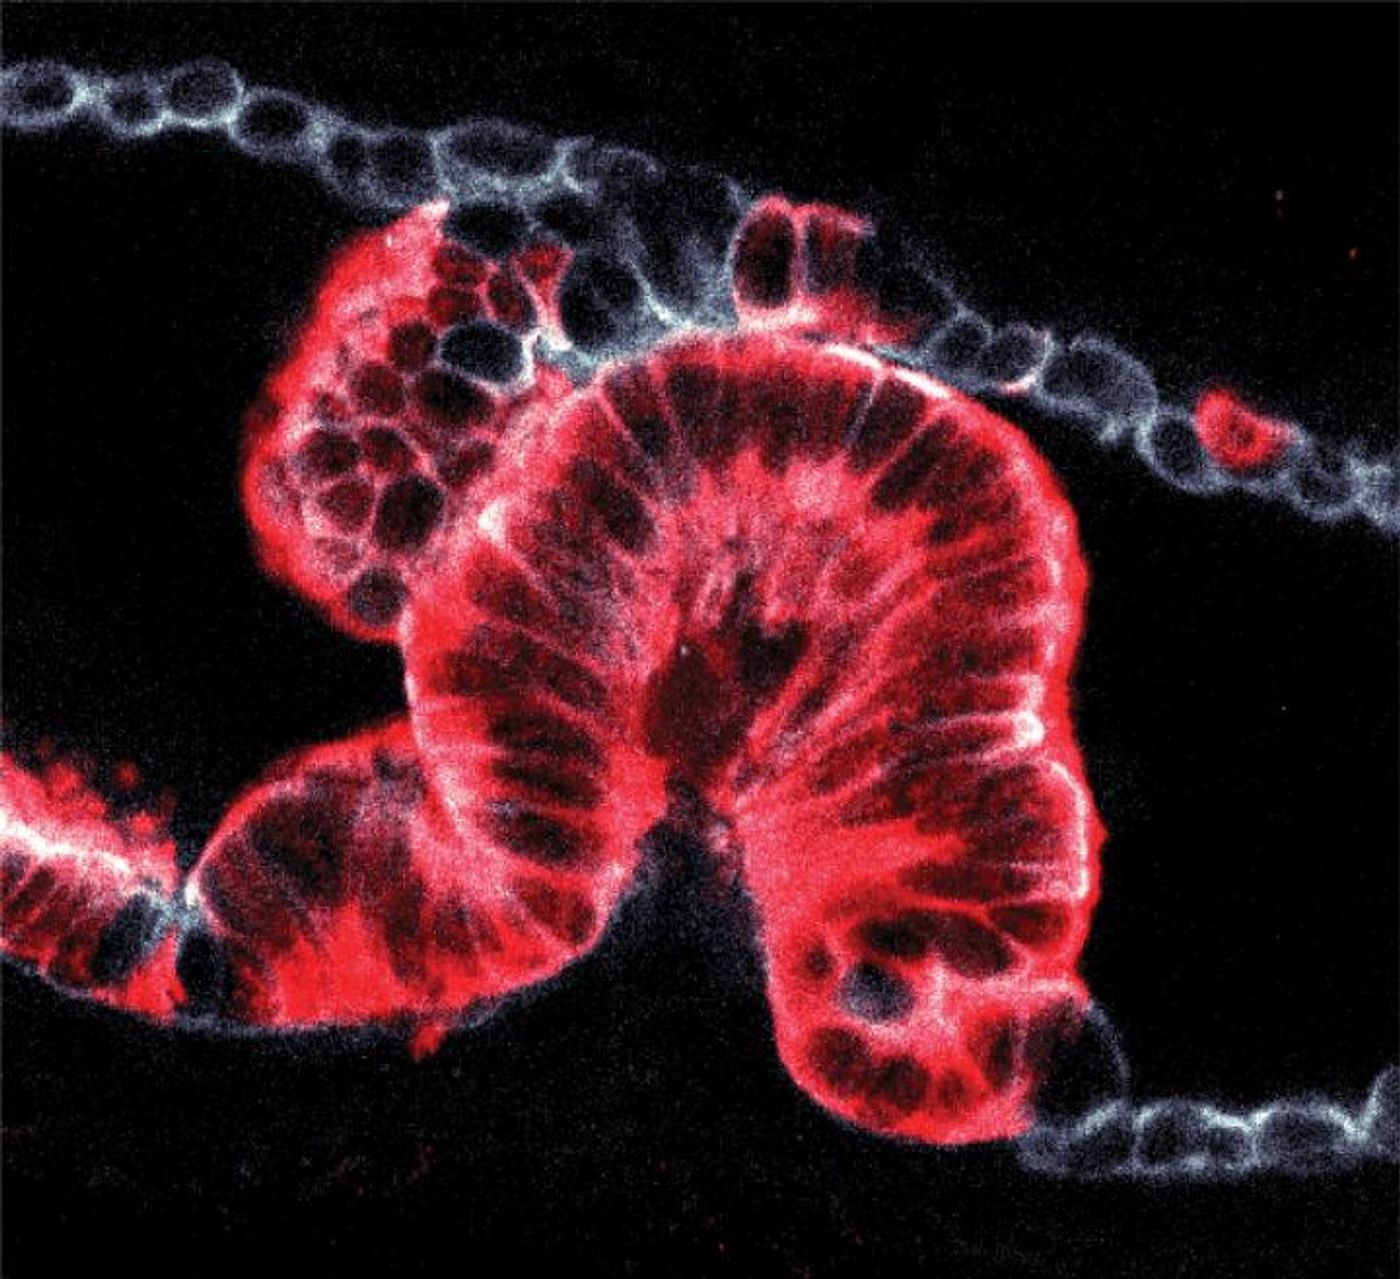 The image shows cancer growing inside the pancreatic duct of a mouse. It was obtained using a new technique to study 3D tissue samples, revealing that cancers can begin as 'endophytic' tumours which grow into the ducts (shown here) or 'exophytic' tumours growing outwards. / Credit: Hendrik Massal, Francis Crick Institute